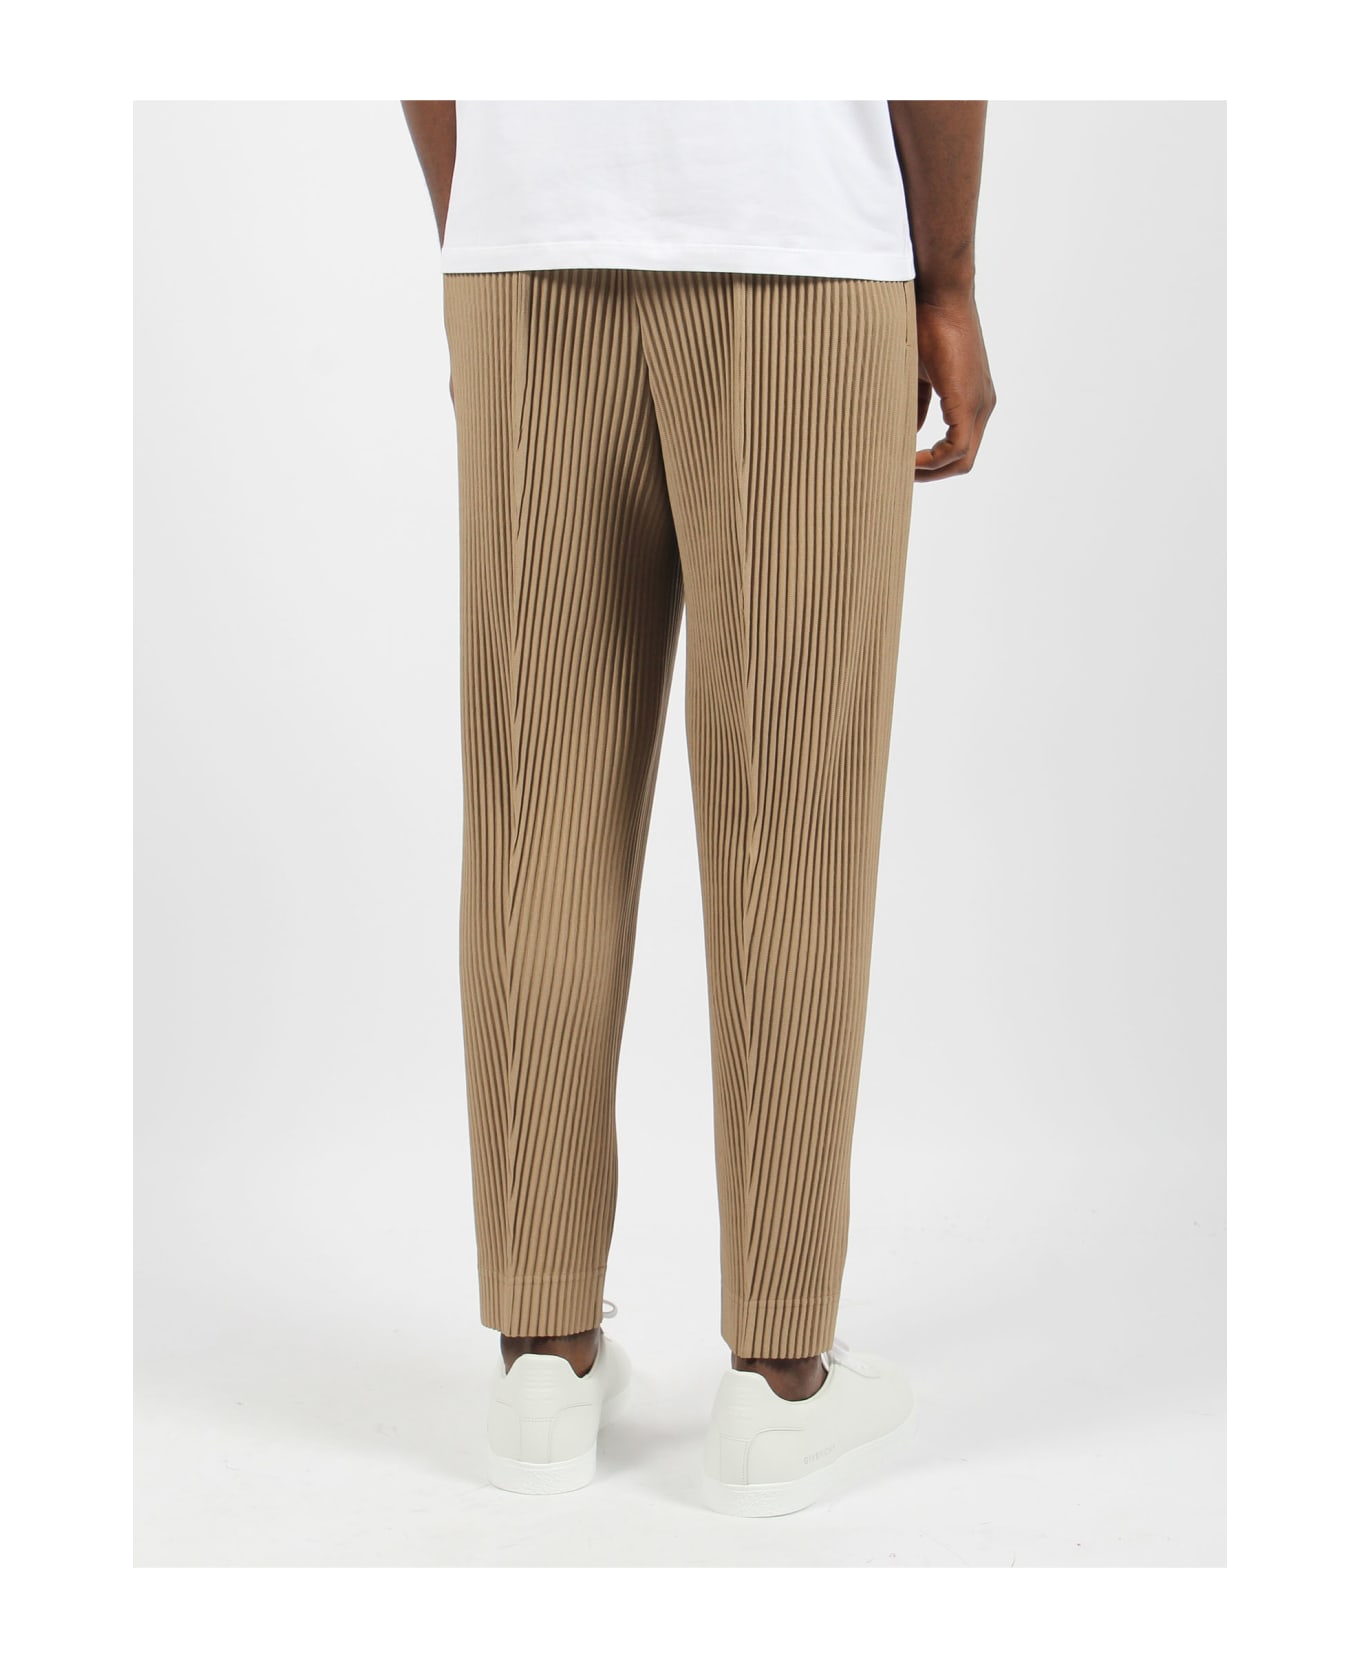 Homme Plissé Issey Miyake Compleat Trousers - Brown